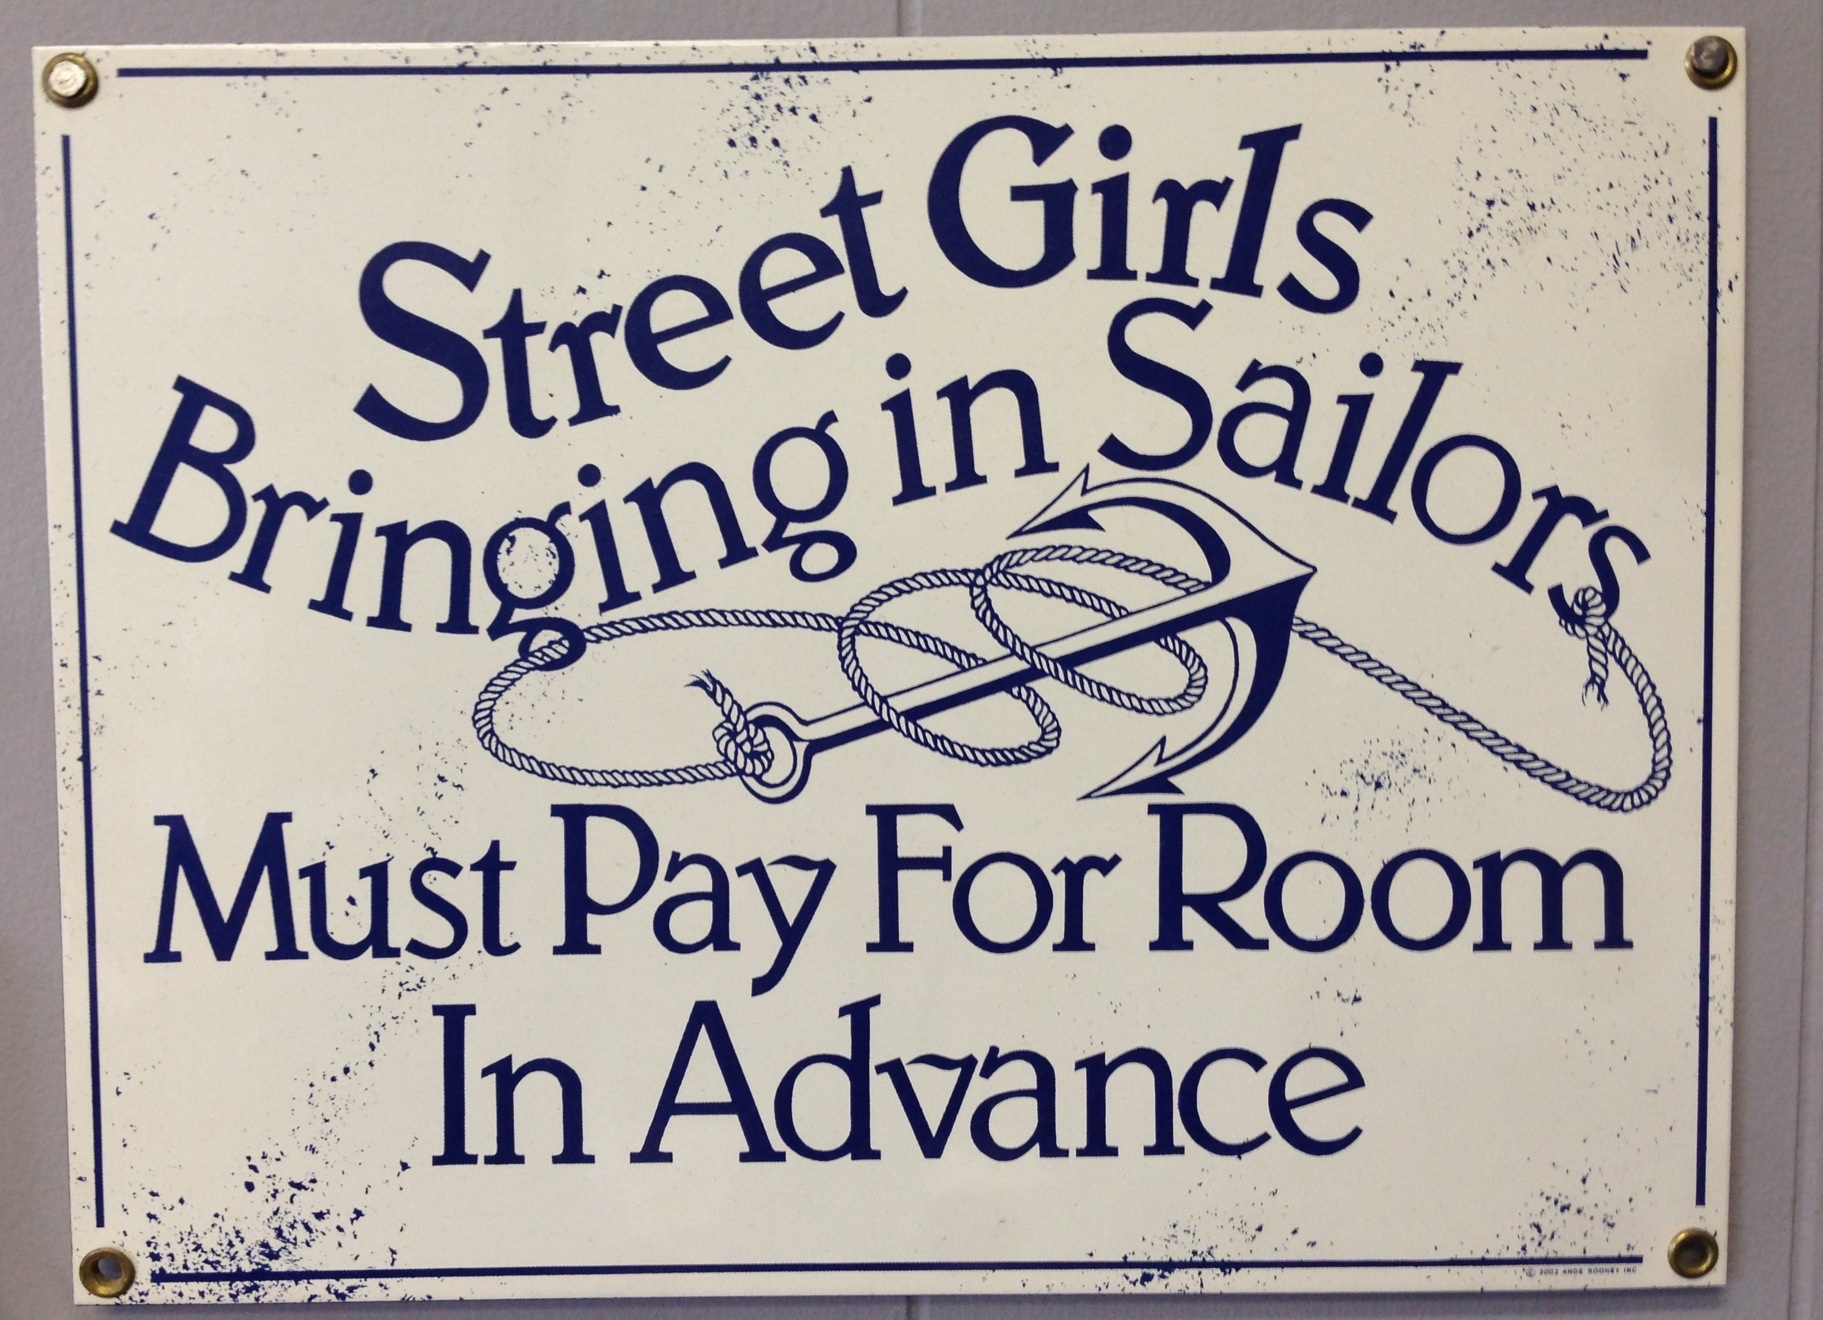 sign, street girls with sailors, pay in advance